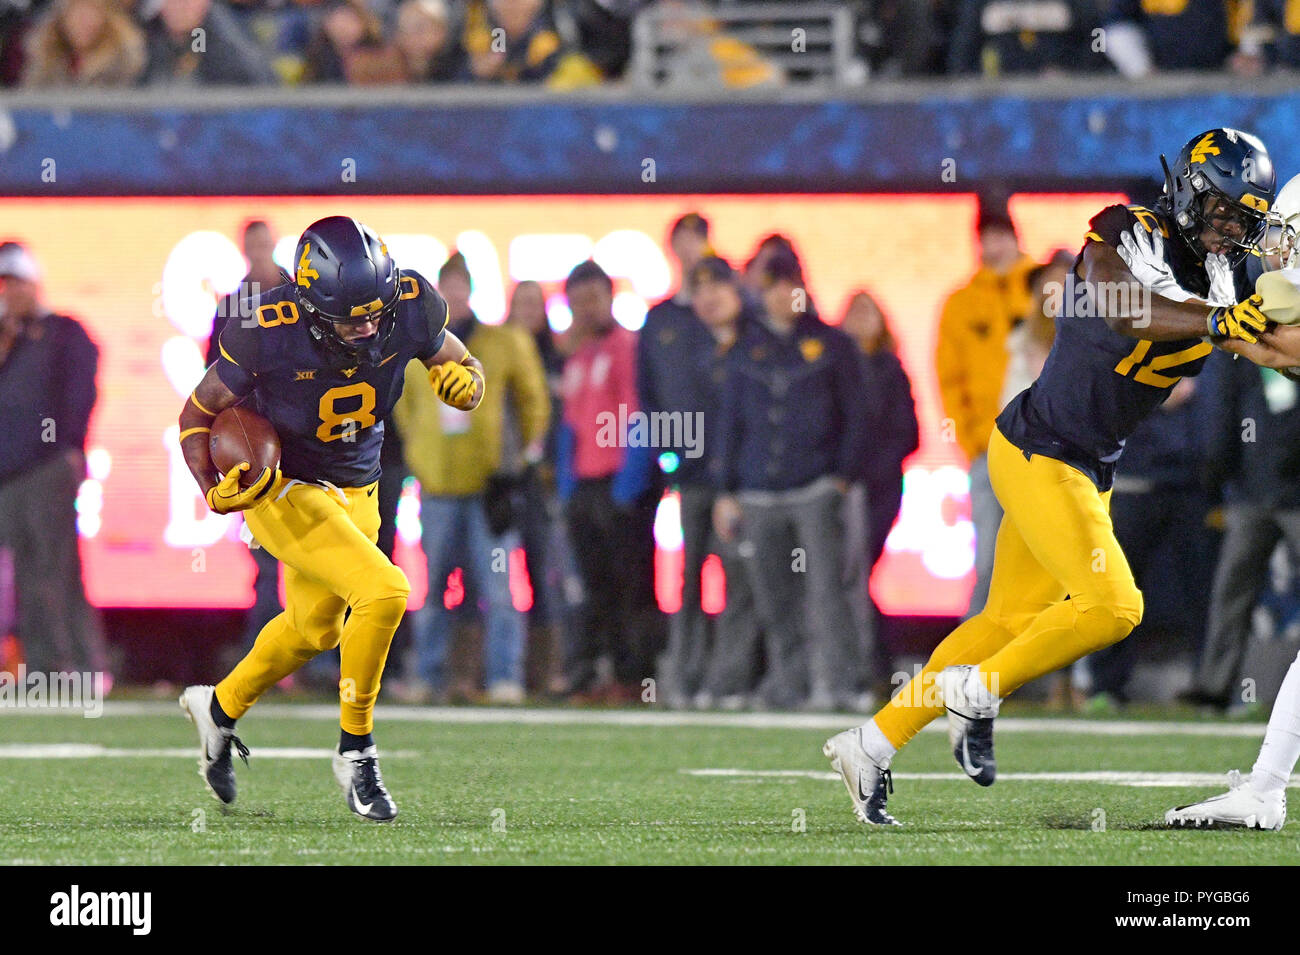 Morgantown, West Virginia, USA. 25th Oct, 2018. West Virginia Mountaineers wide receiver MARCUS SIMMS (8) turn upfield with the ball during the Big 12 football game played at Mountaineer Field in Morgantown, WV. WVU routed Baylor 58-14. Credit: Ken Inness/ZUMA Wire/Alamy Live News Stock Photo